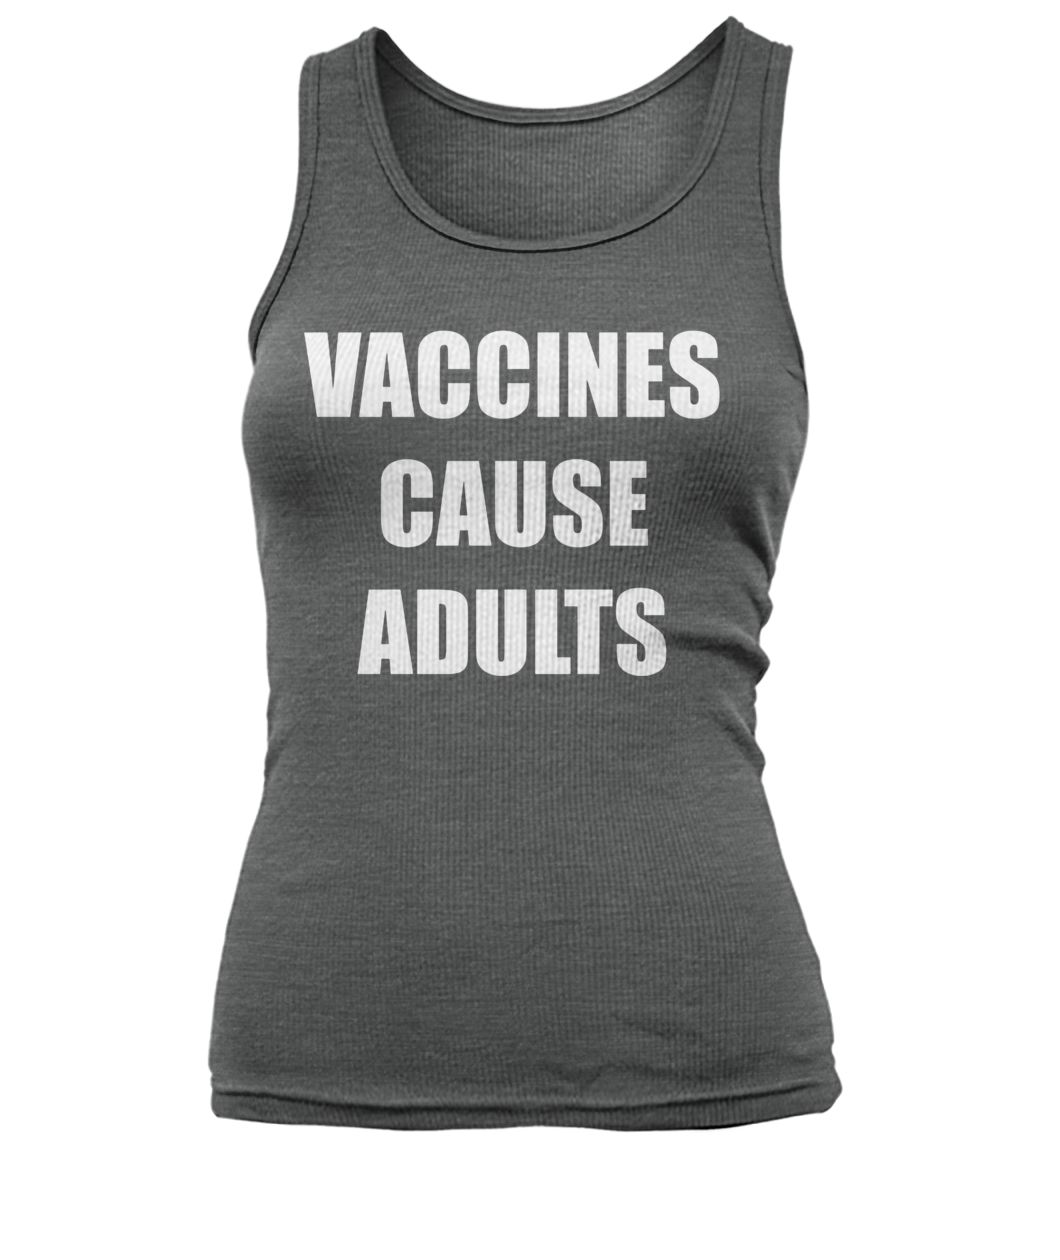 Justin trudeau vaccines cause adults women's tank top